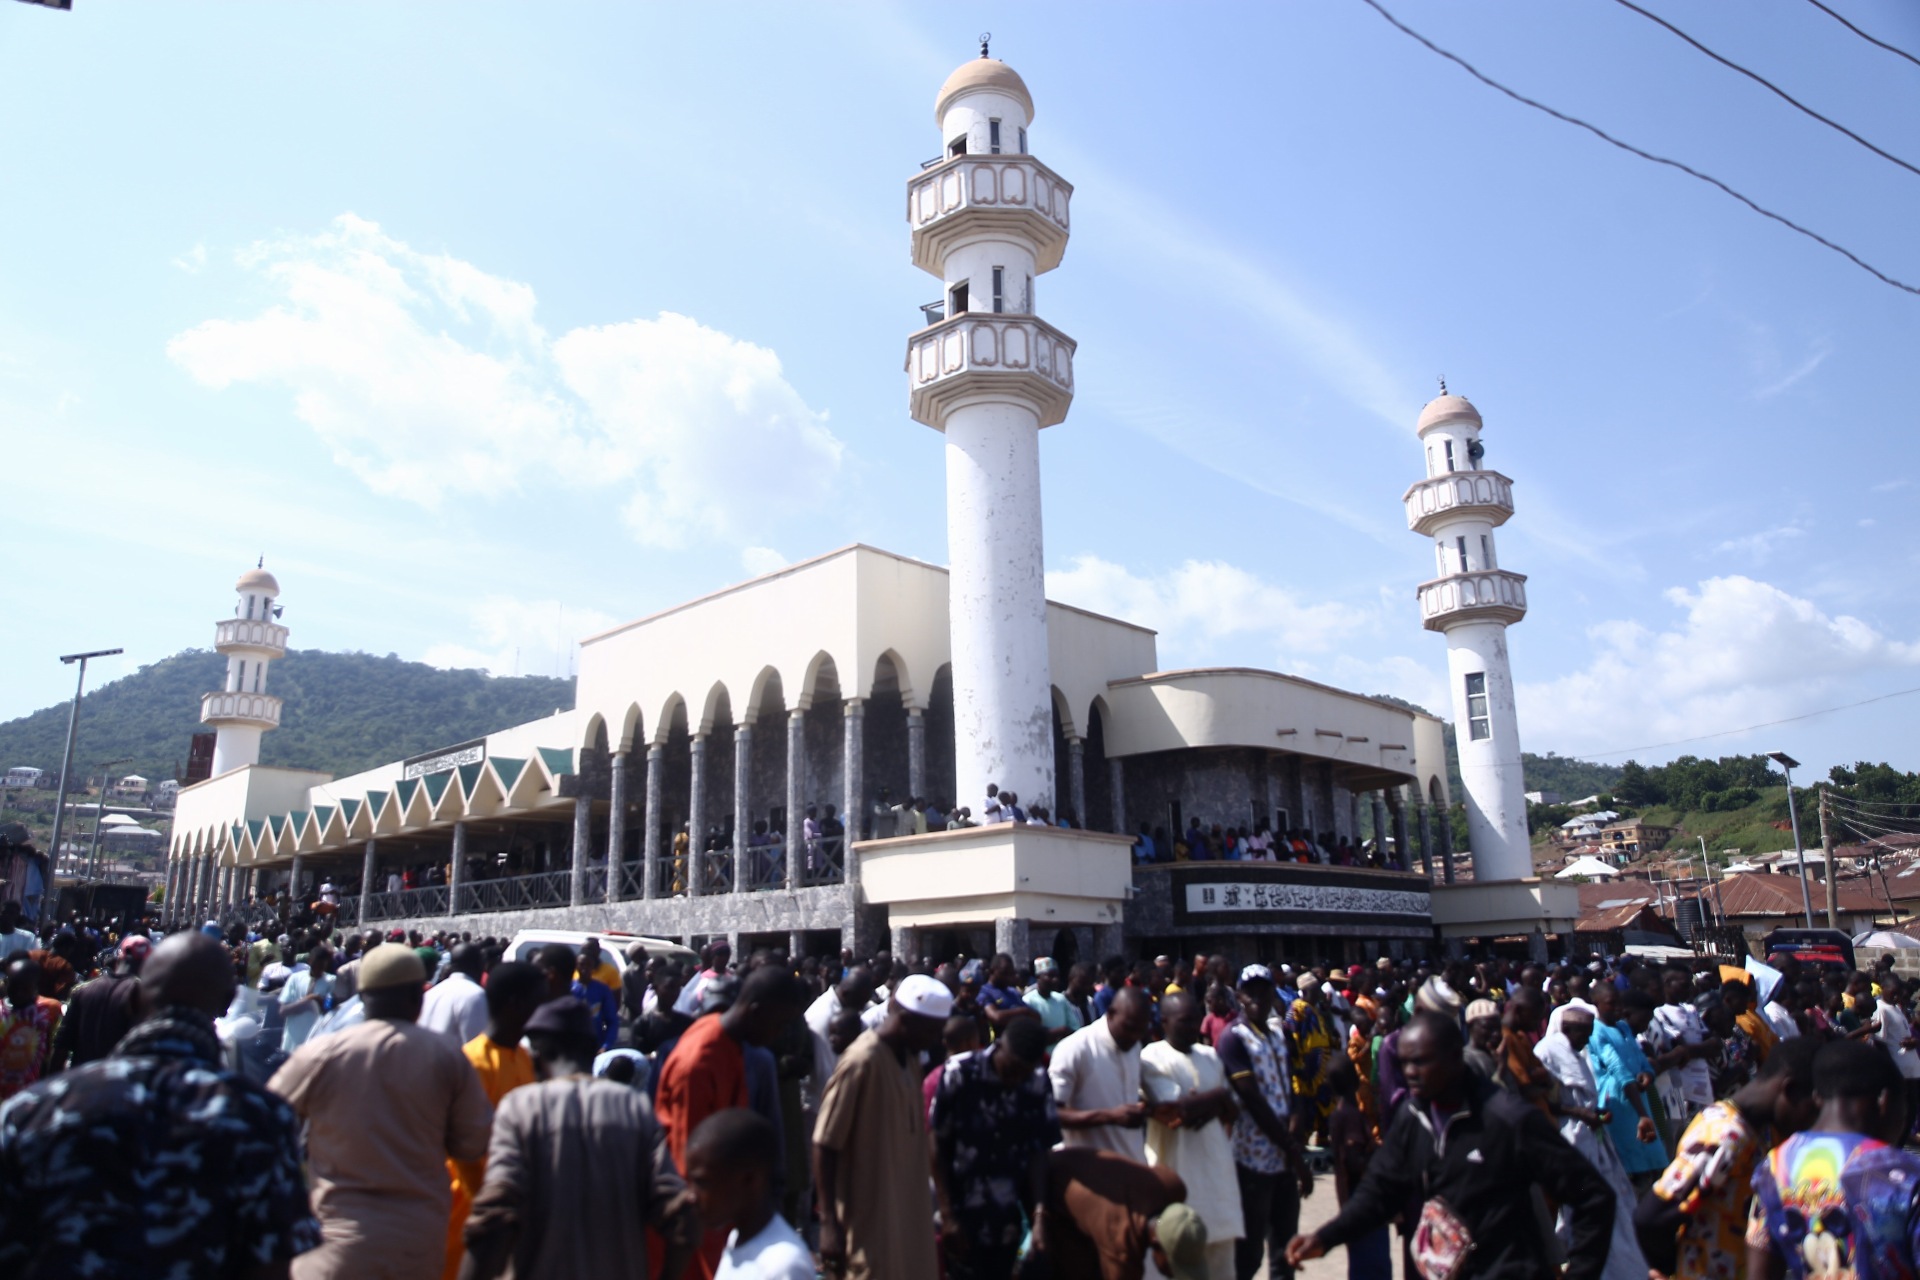 Crowd at the Lokoja Central Mosque